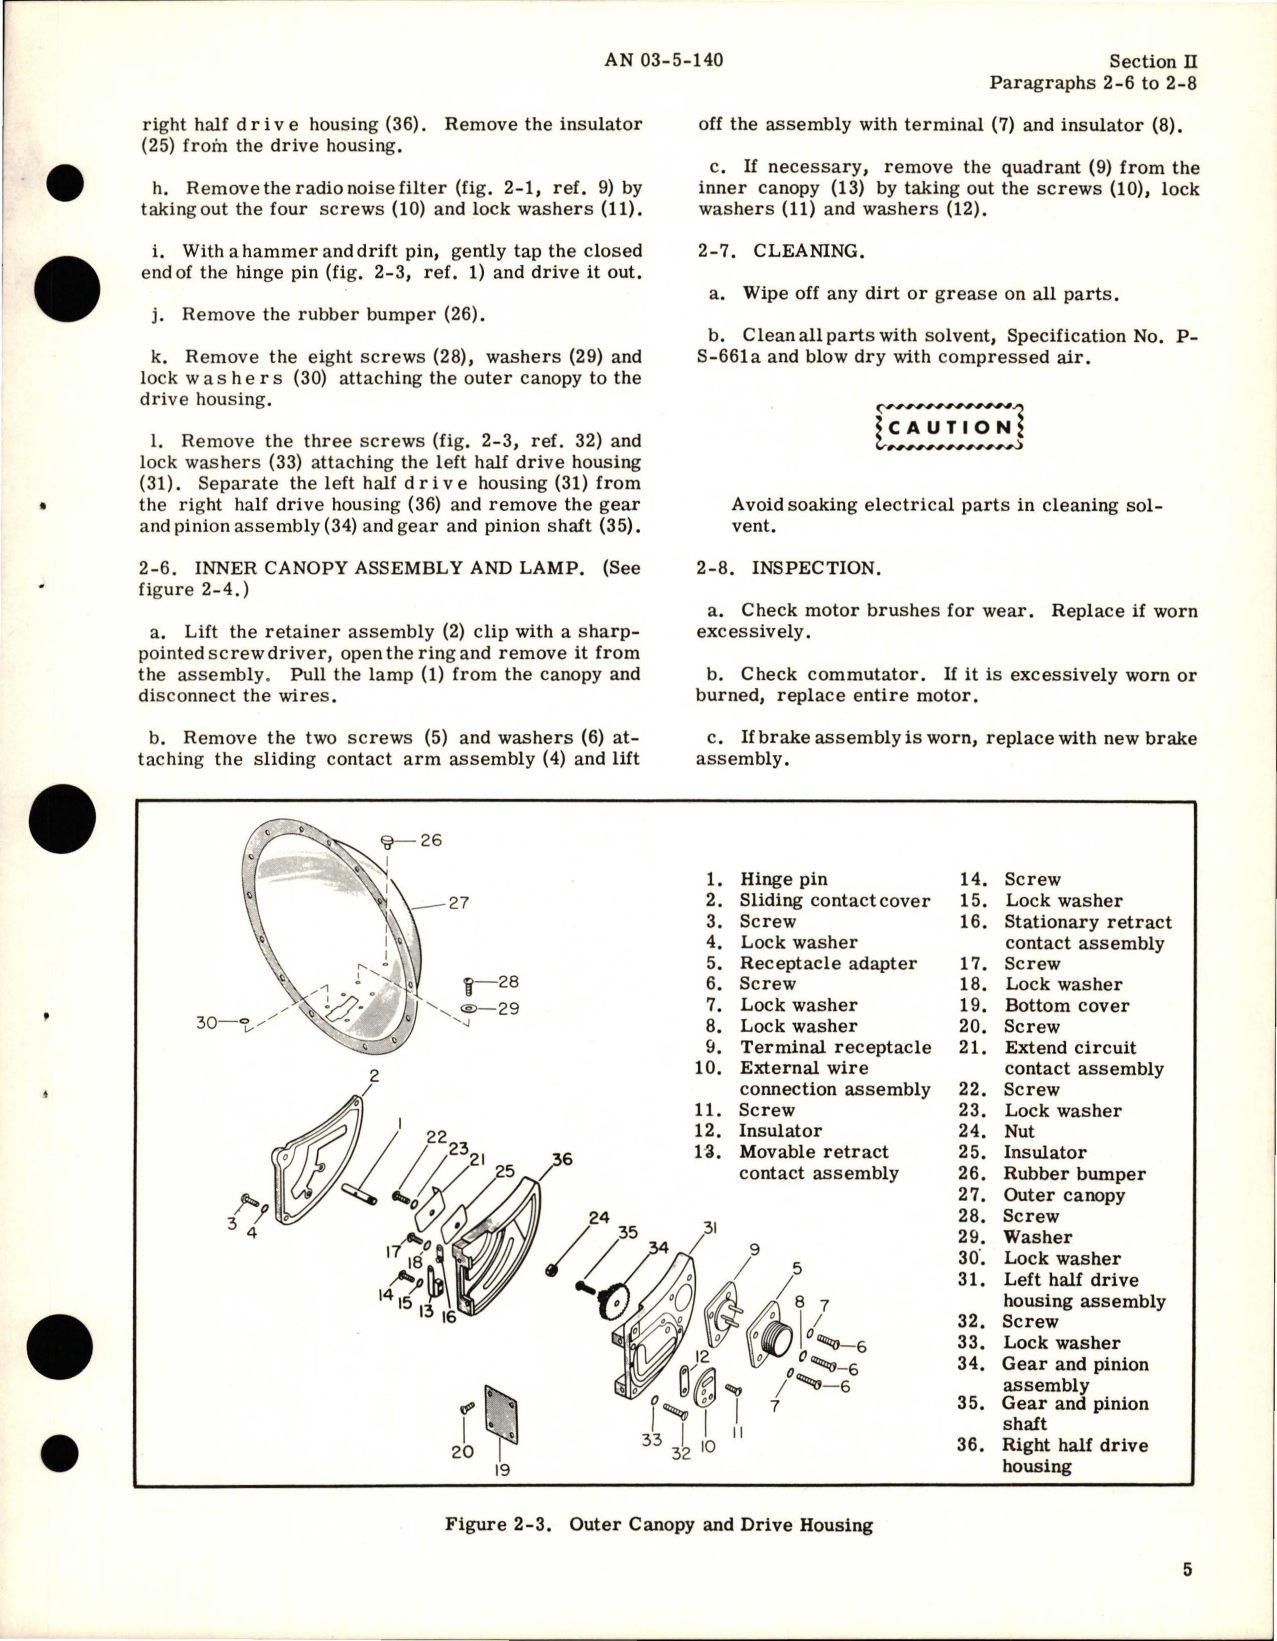 Sample page 9 from AirCorps Library document: Overhaul Instructions for Landing Light Assembly - AN 3095